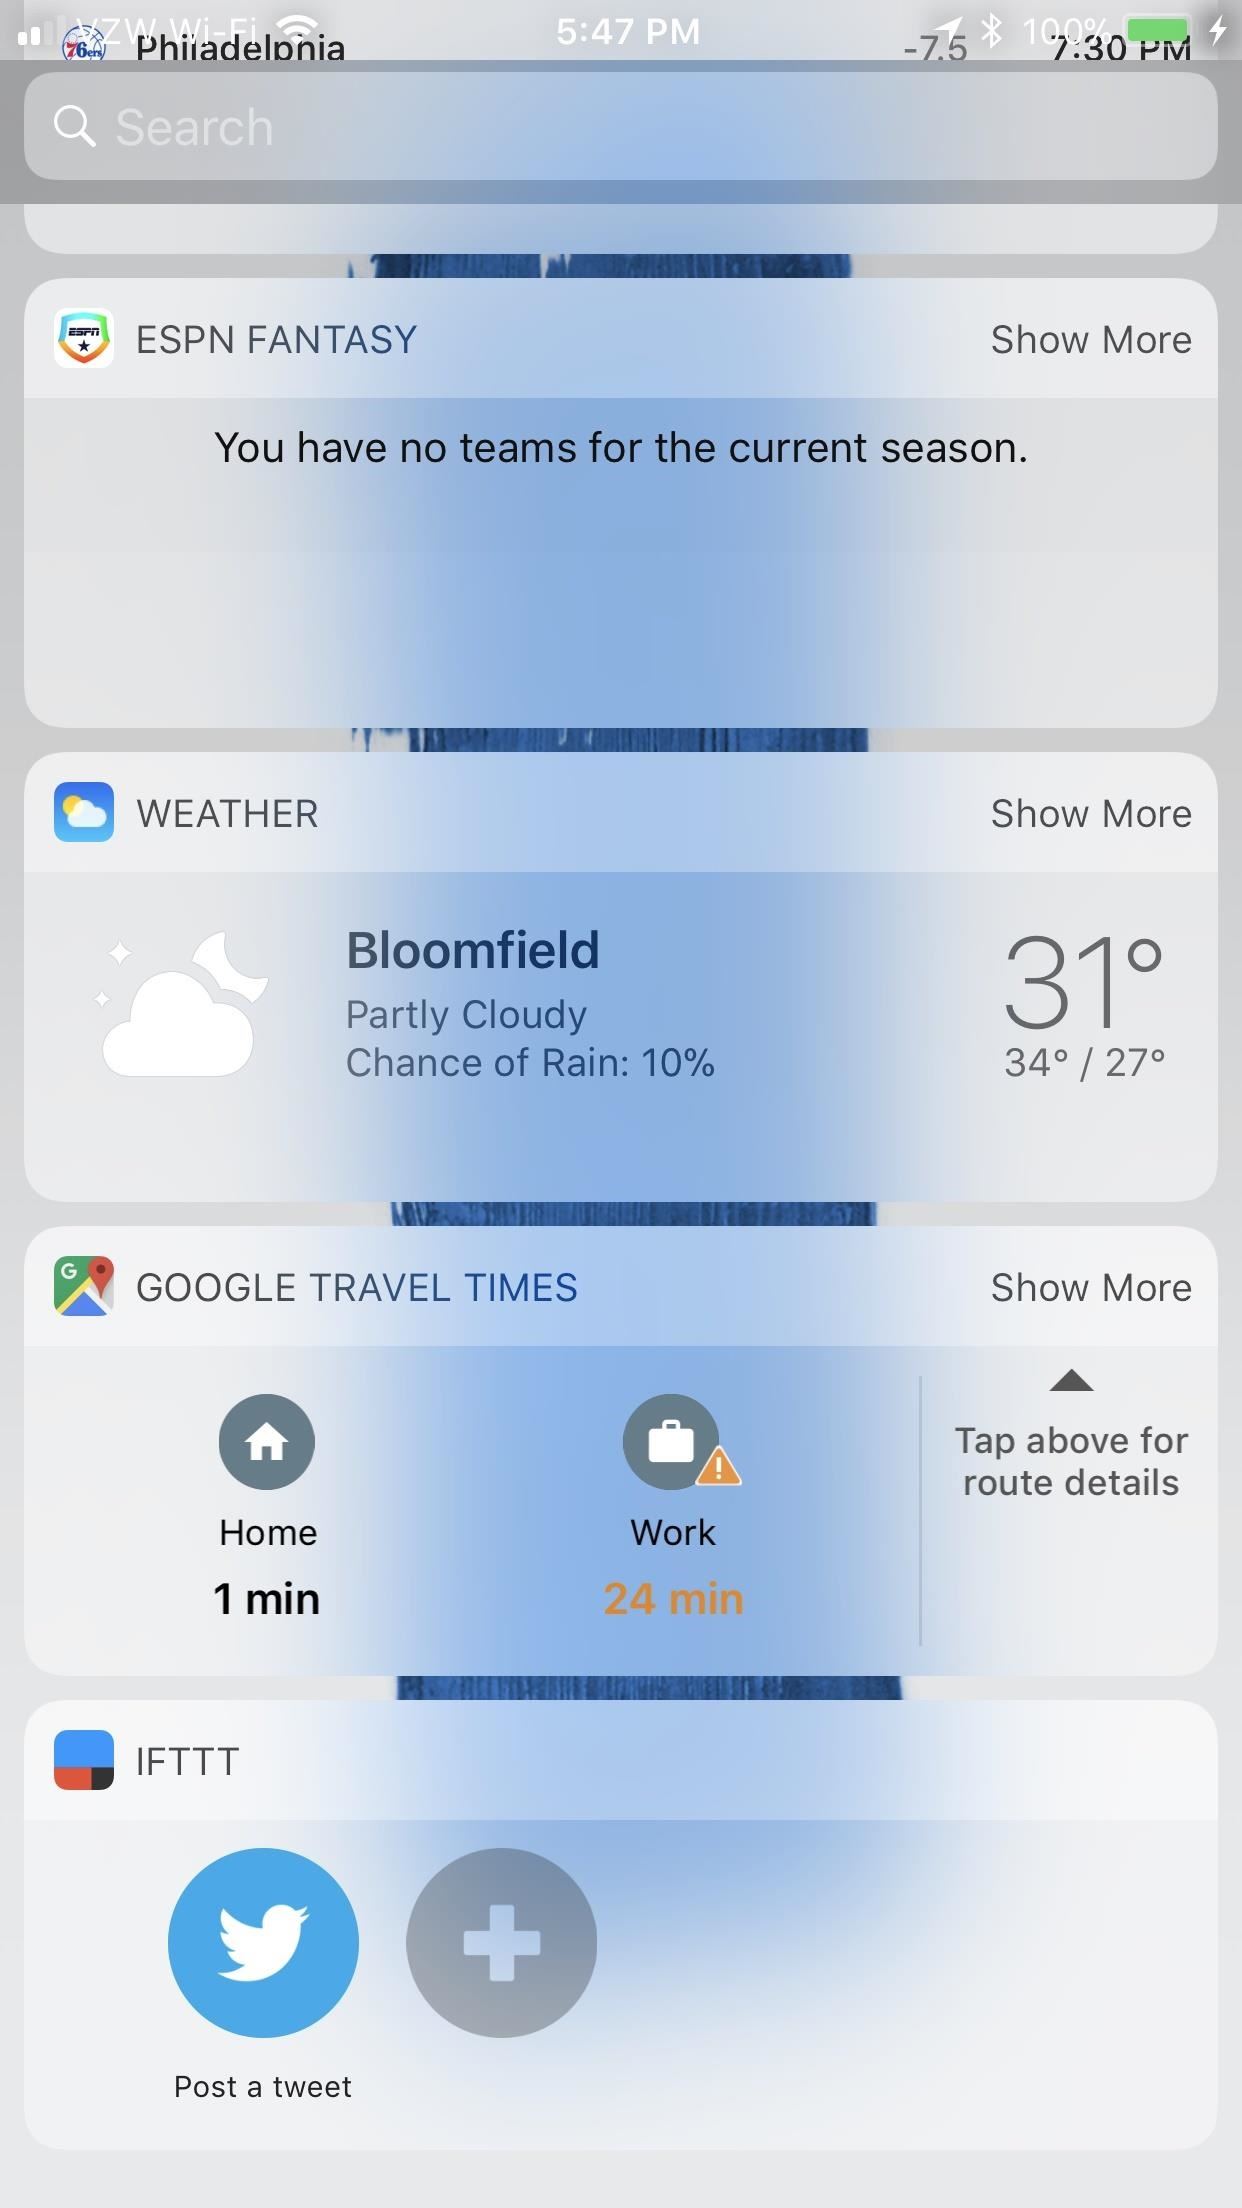 IFTTT 101: How to Use Widgets to Control Your Favorite Applets on iPhone or Android